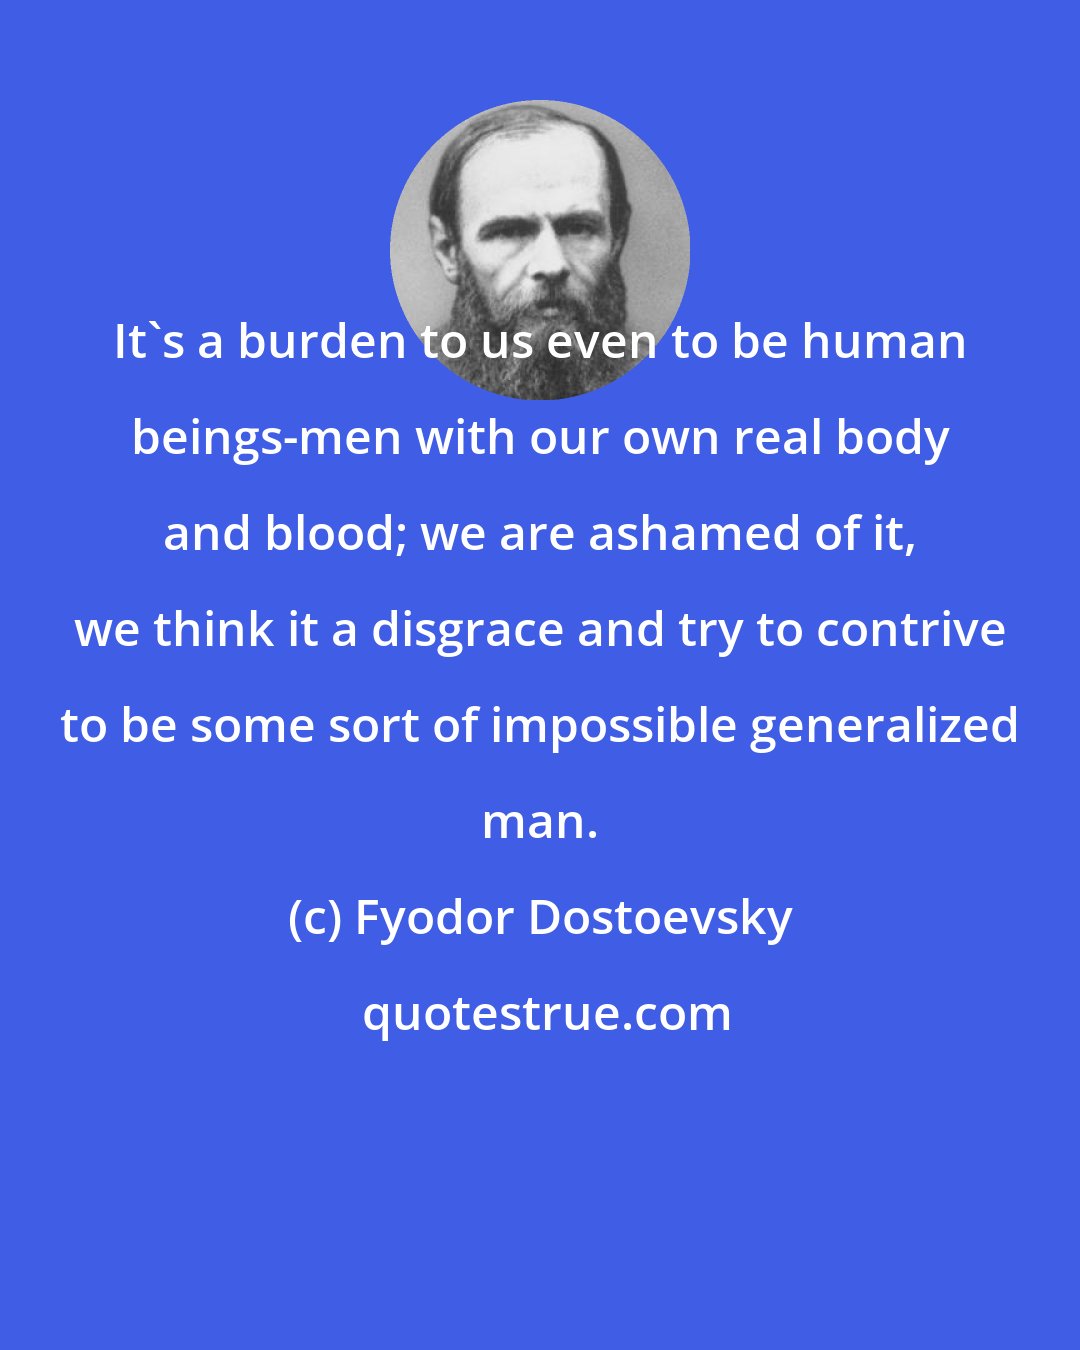 Fyodor Dostoevsky: It's a burden to us even to be human beings-men with our own real body and blood; we are ashamed of it, we think it a disgrace and try to contrive to be some sort of impossible generalized man.